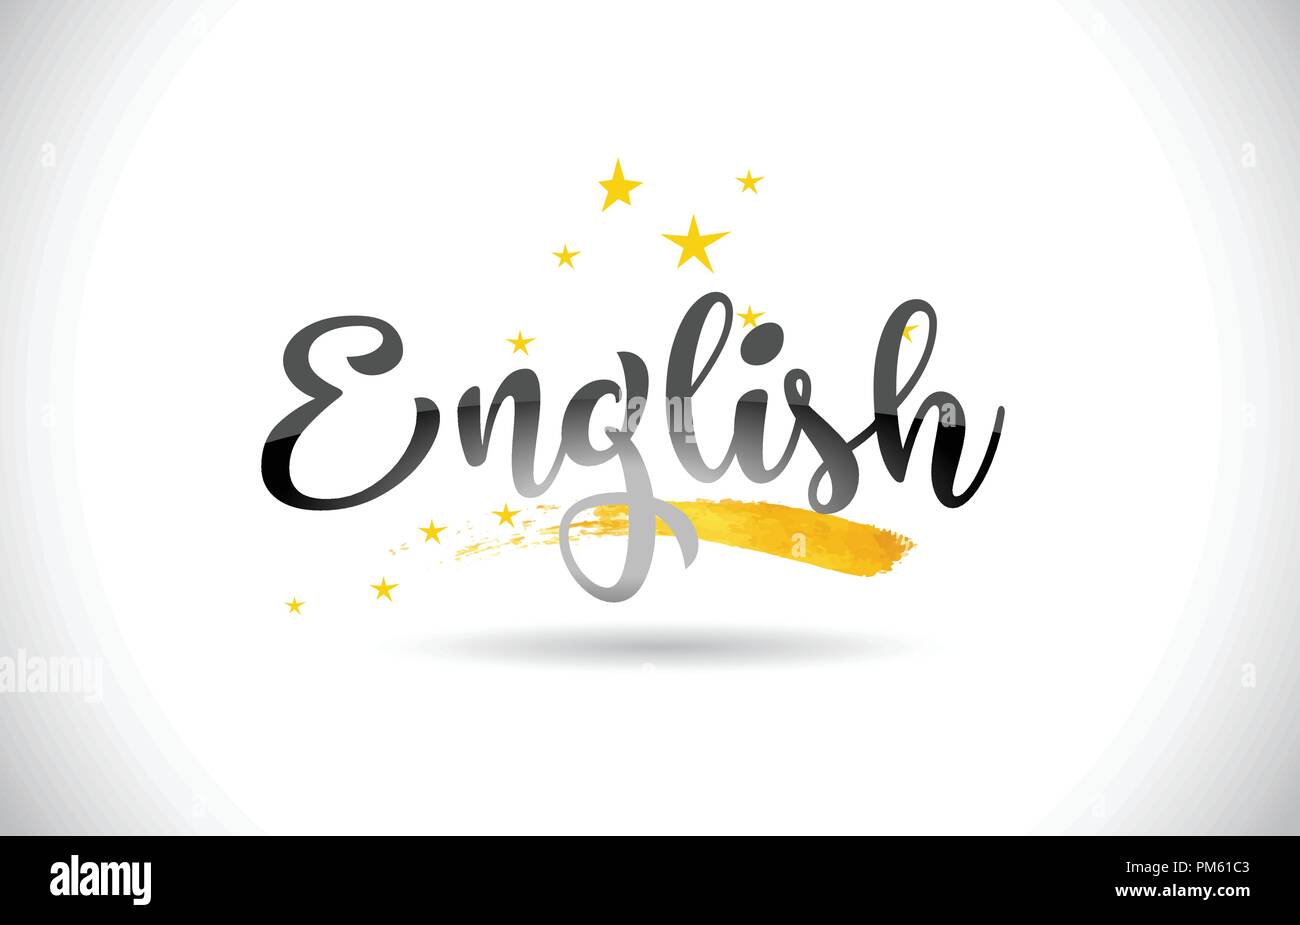 English Word Text with Golden Stars Trail and Handwritten Curved Font Vector Illustration. Stock Vector